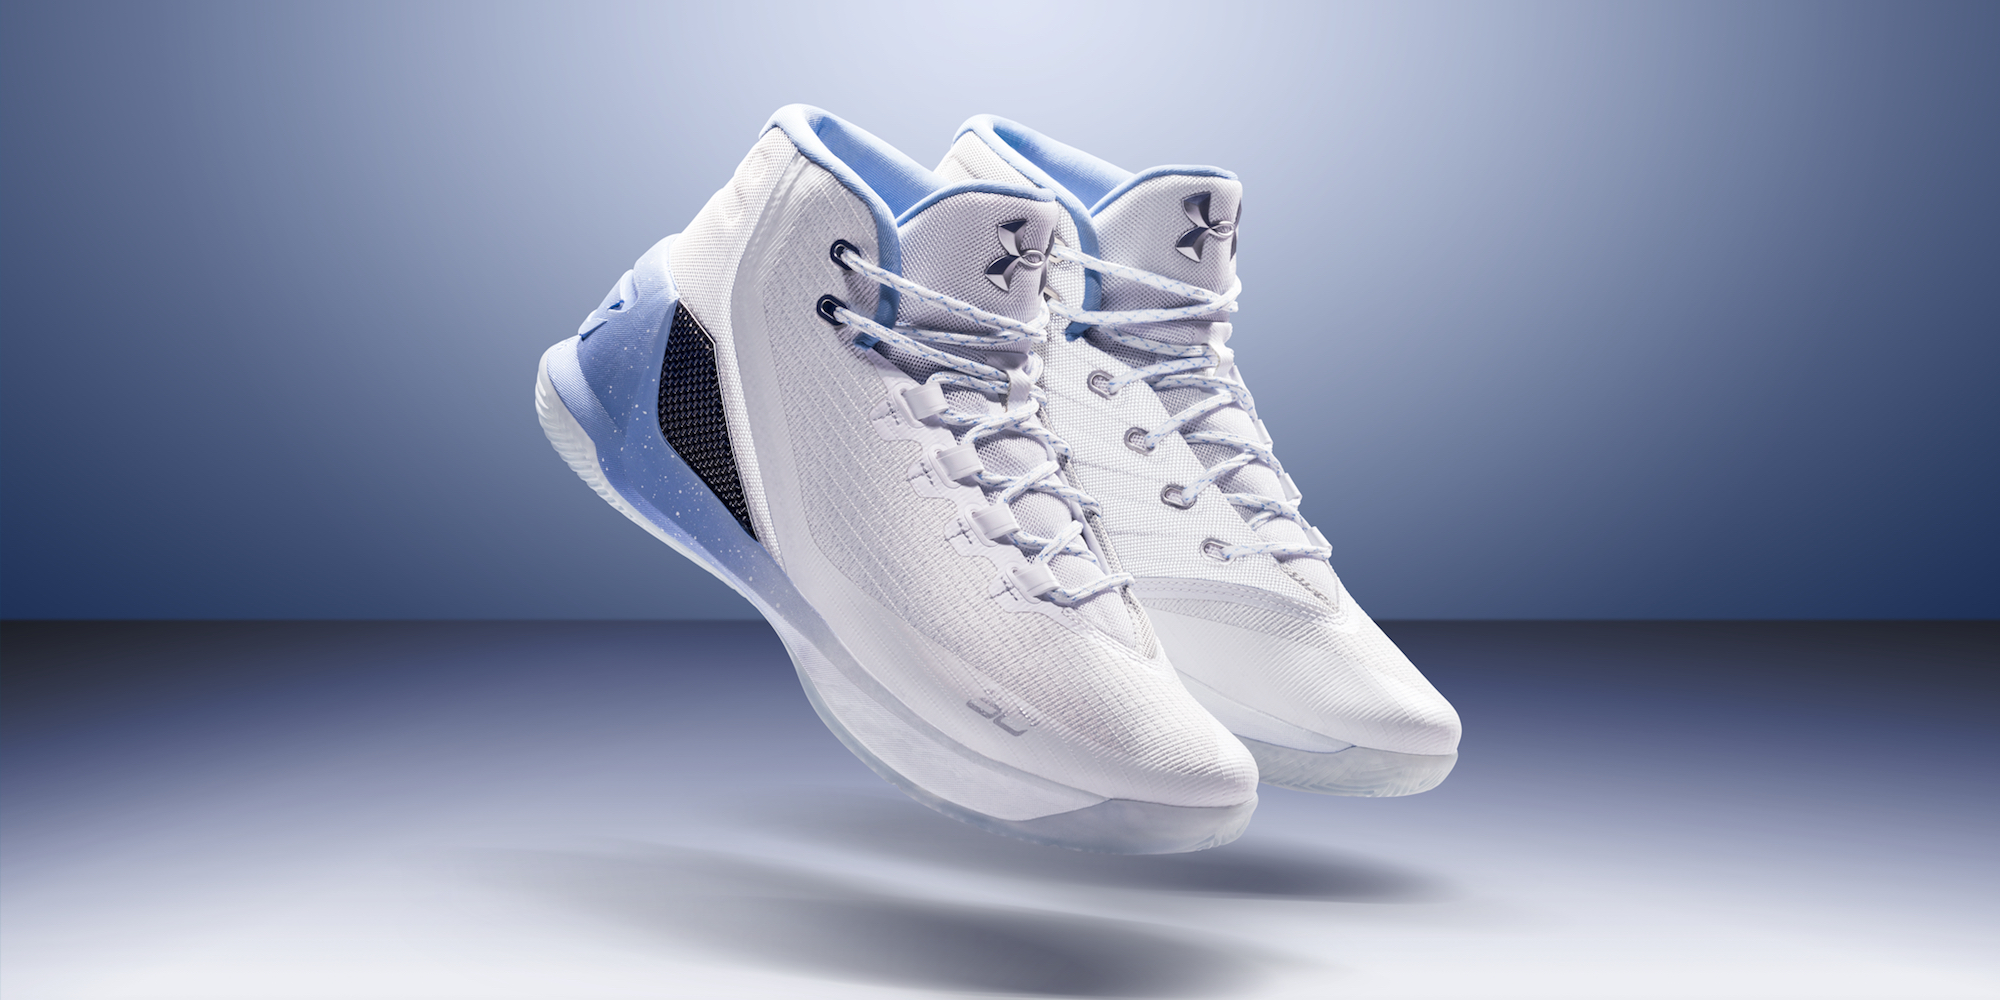 Under Armour Curry 2 5 73 9 Release Date